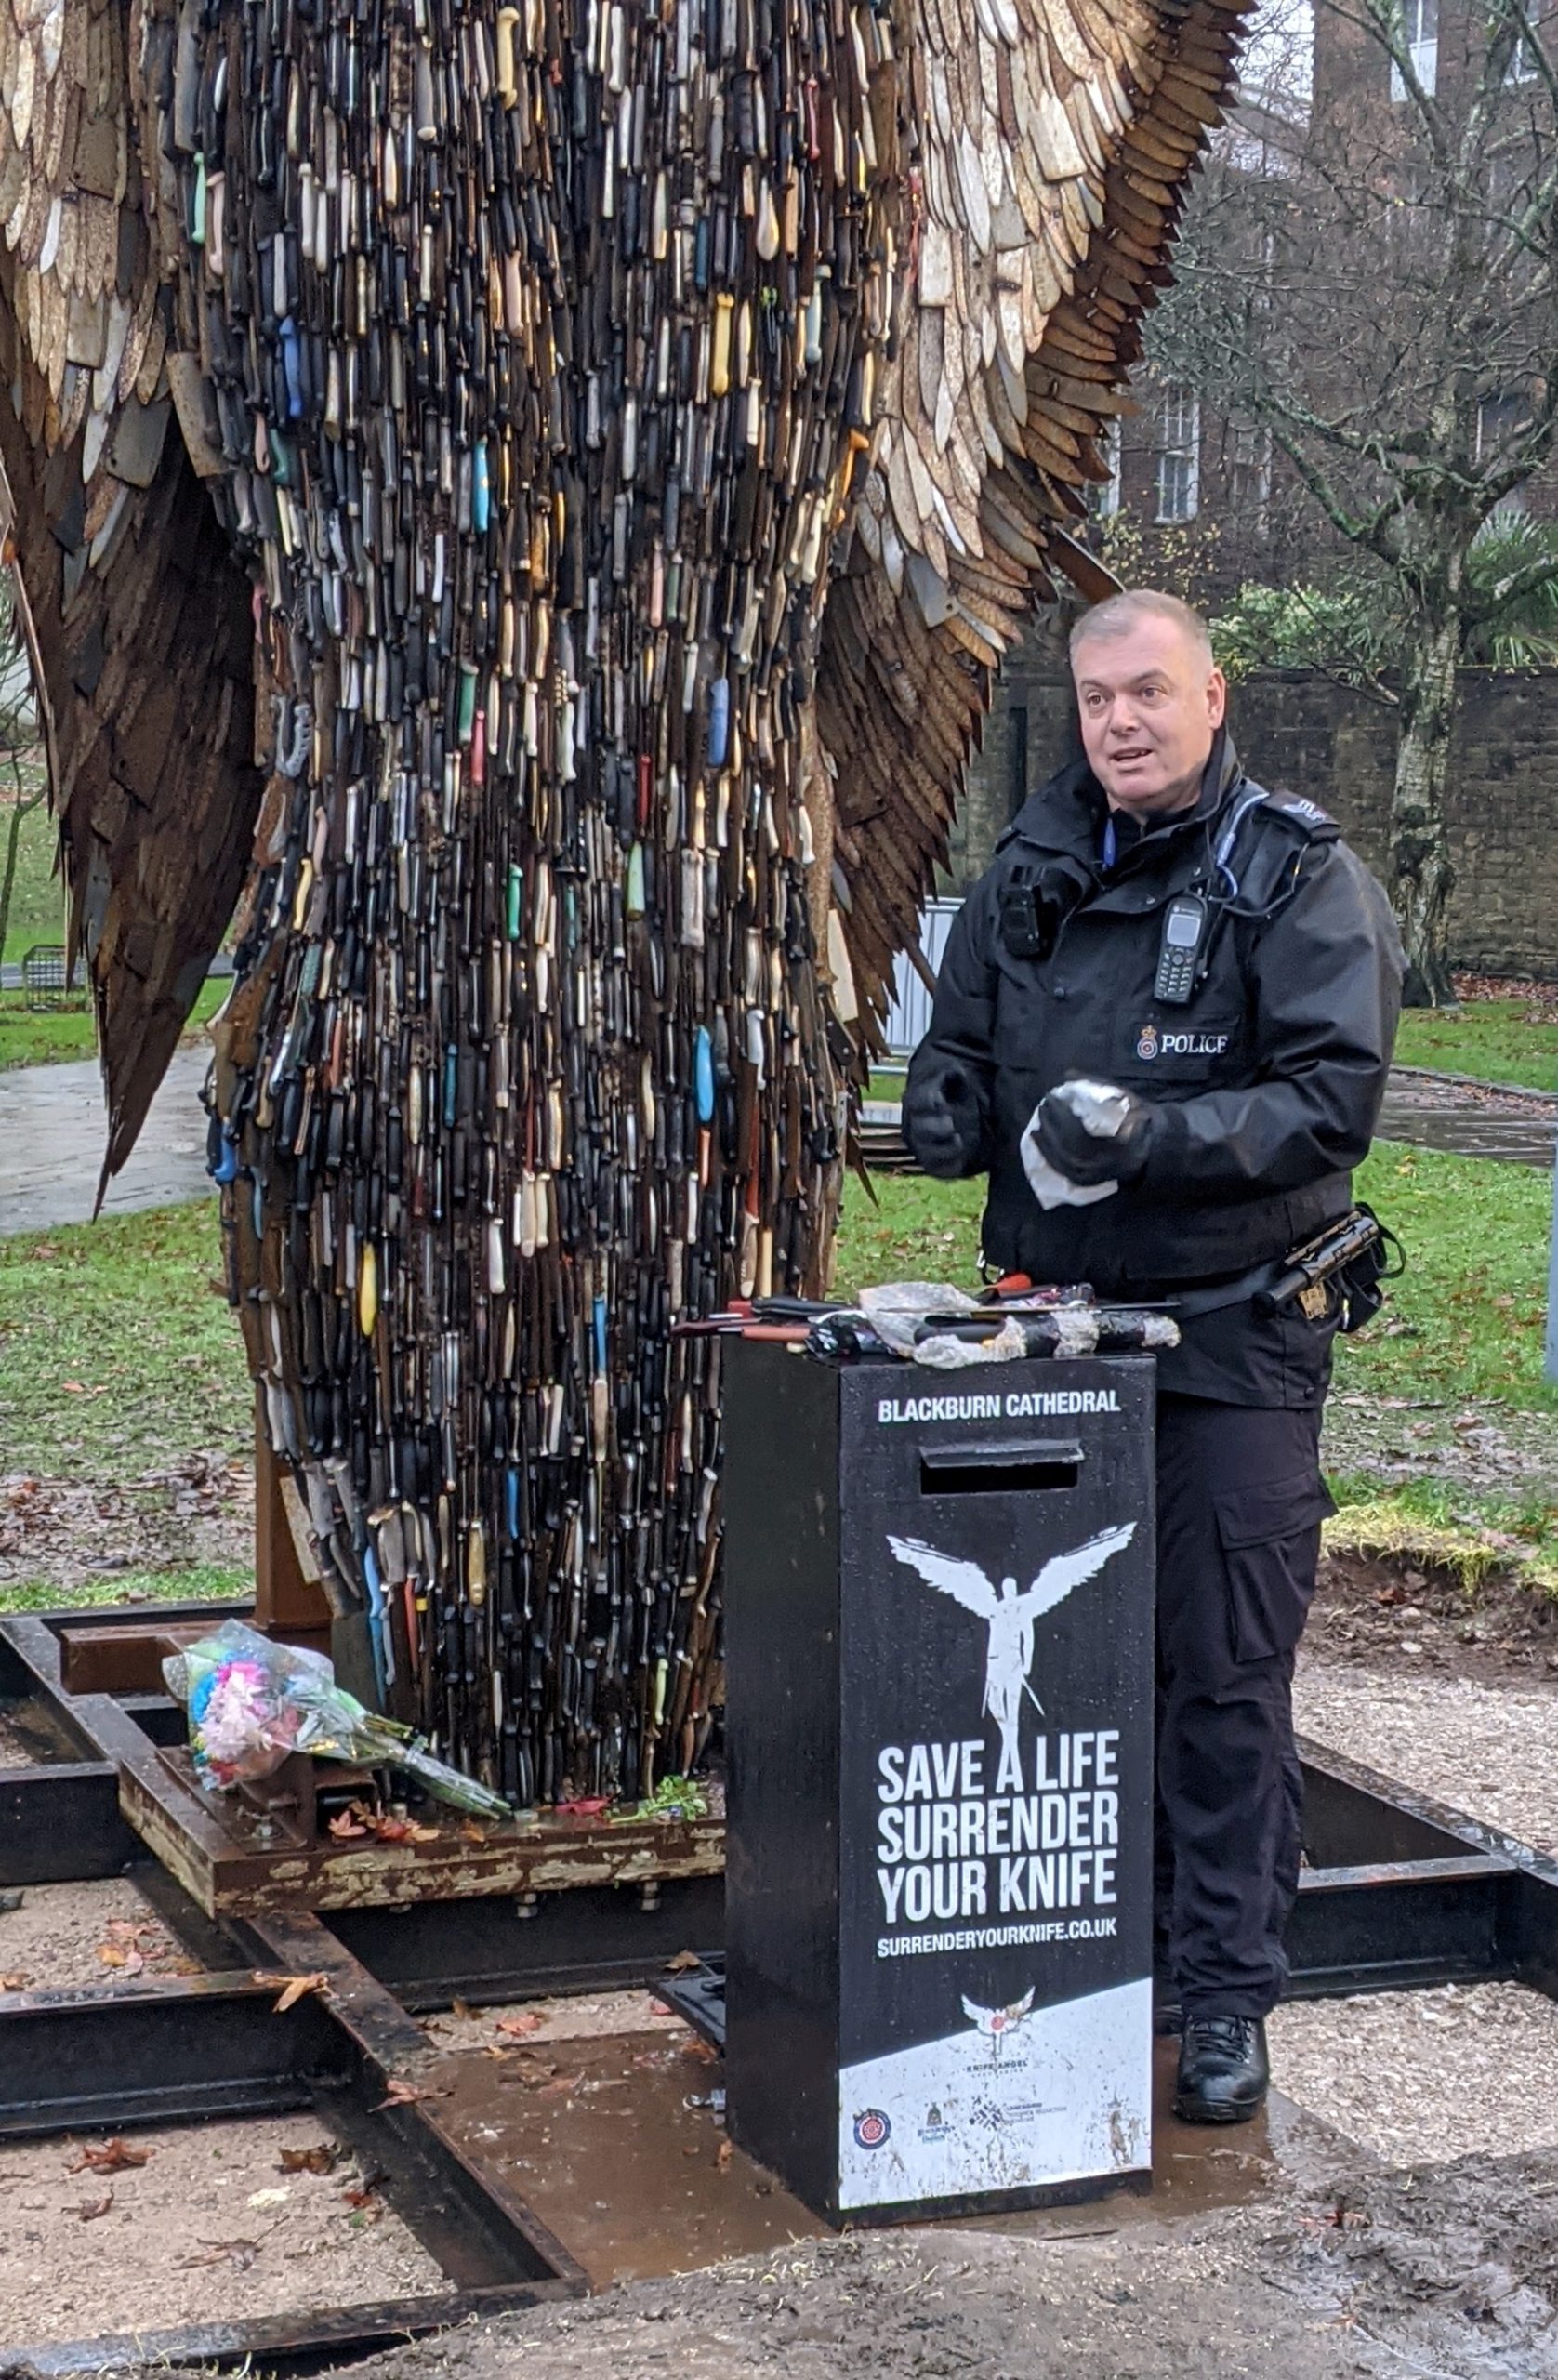 Knife bin at the Knife Angel being emptied by a police officer